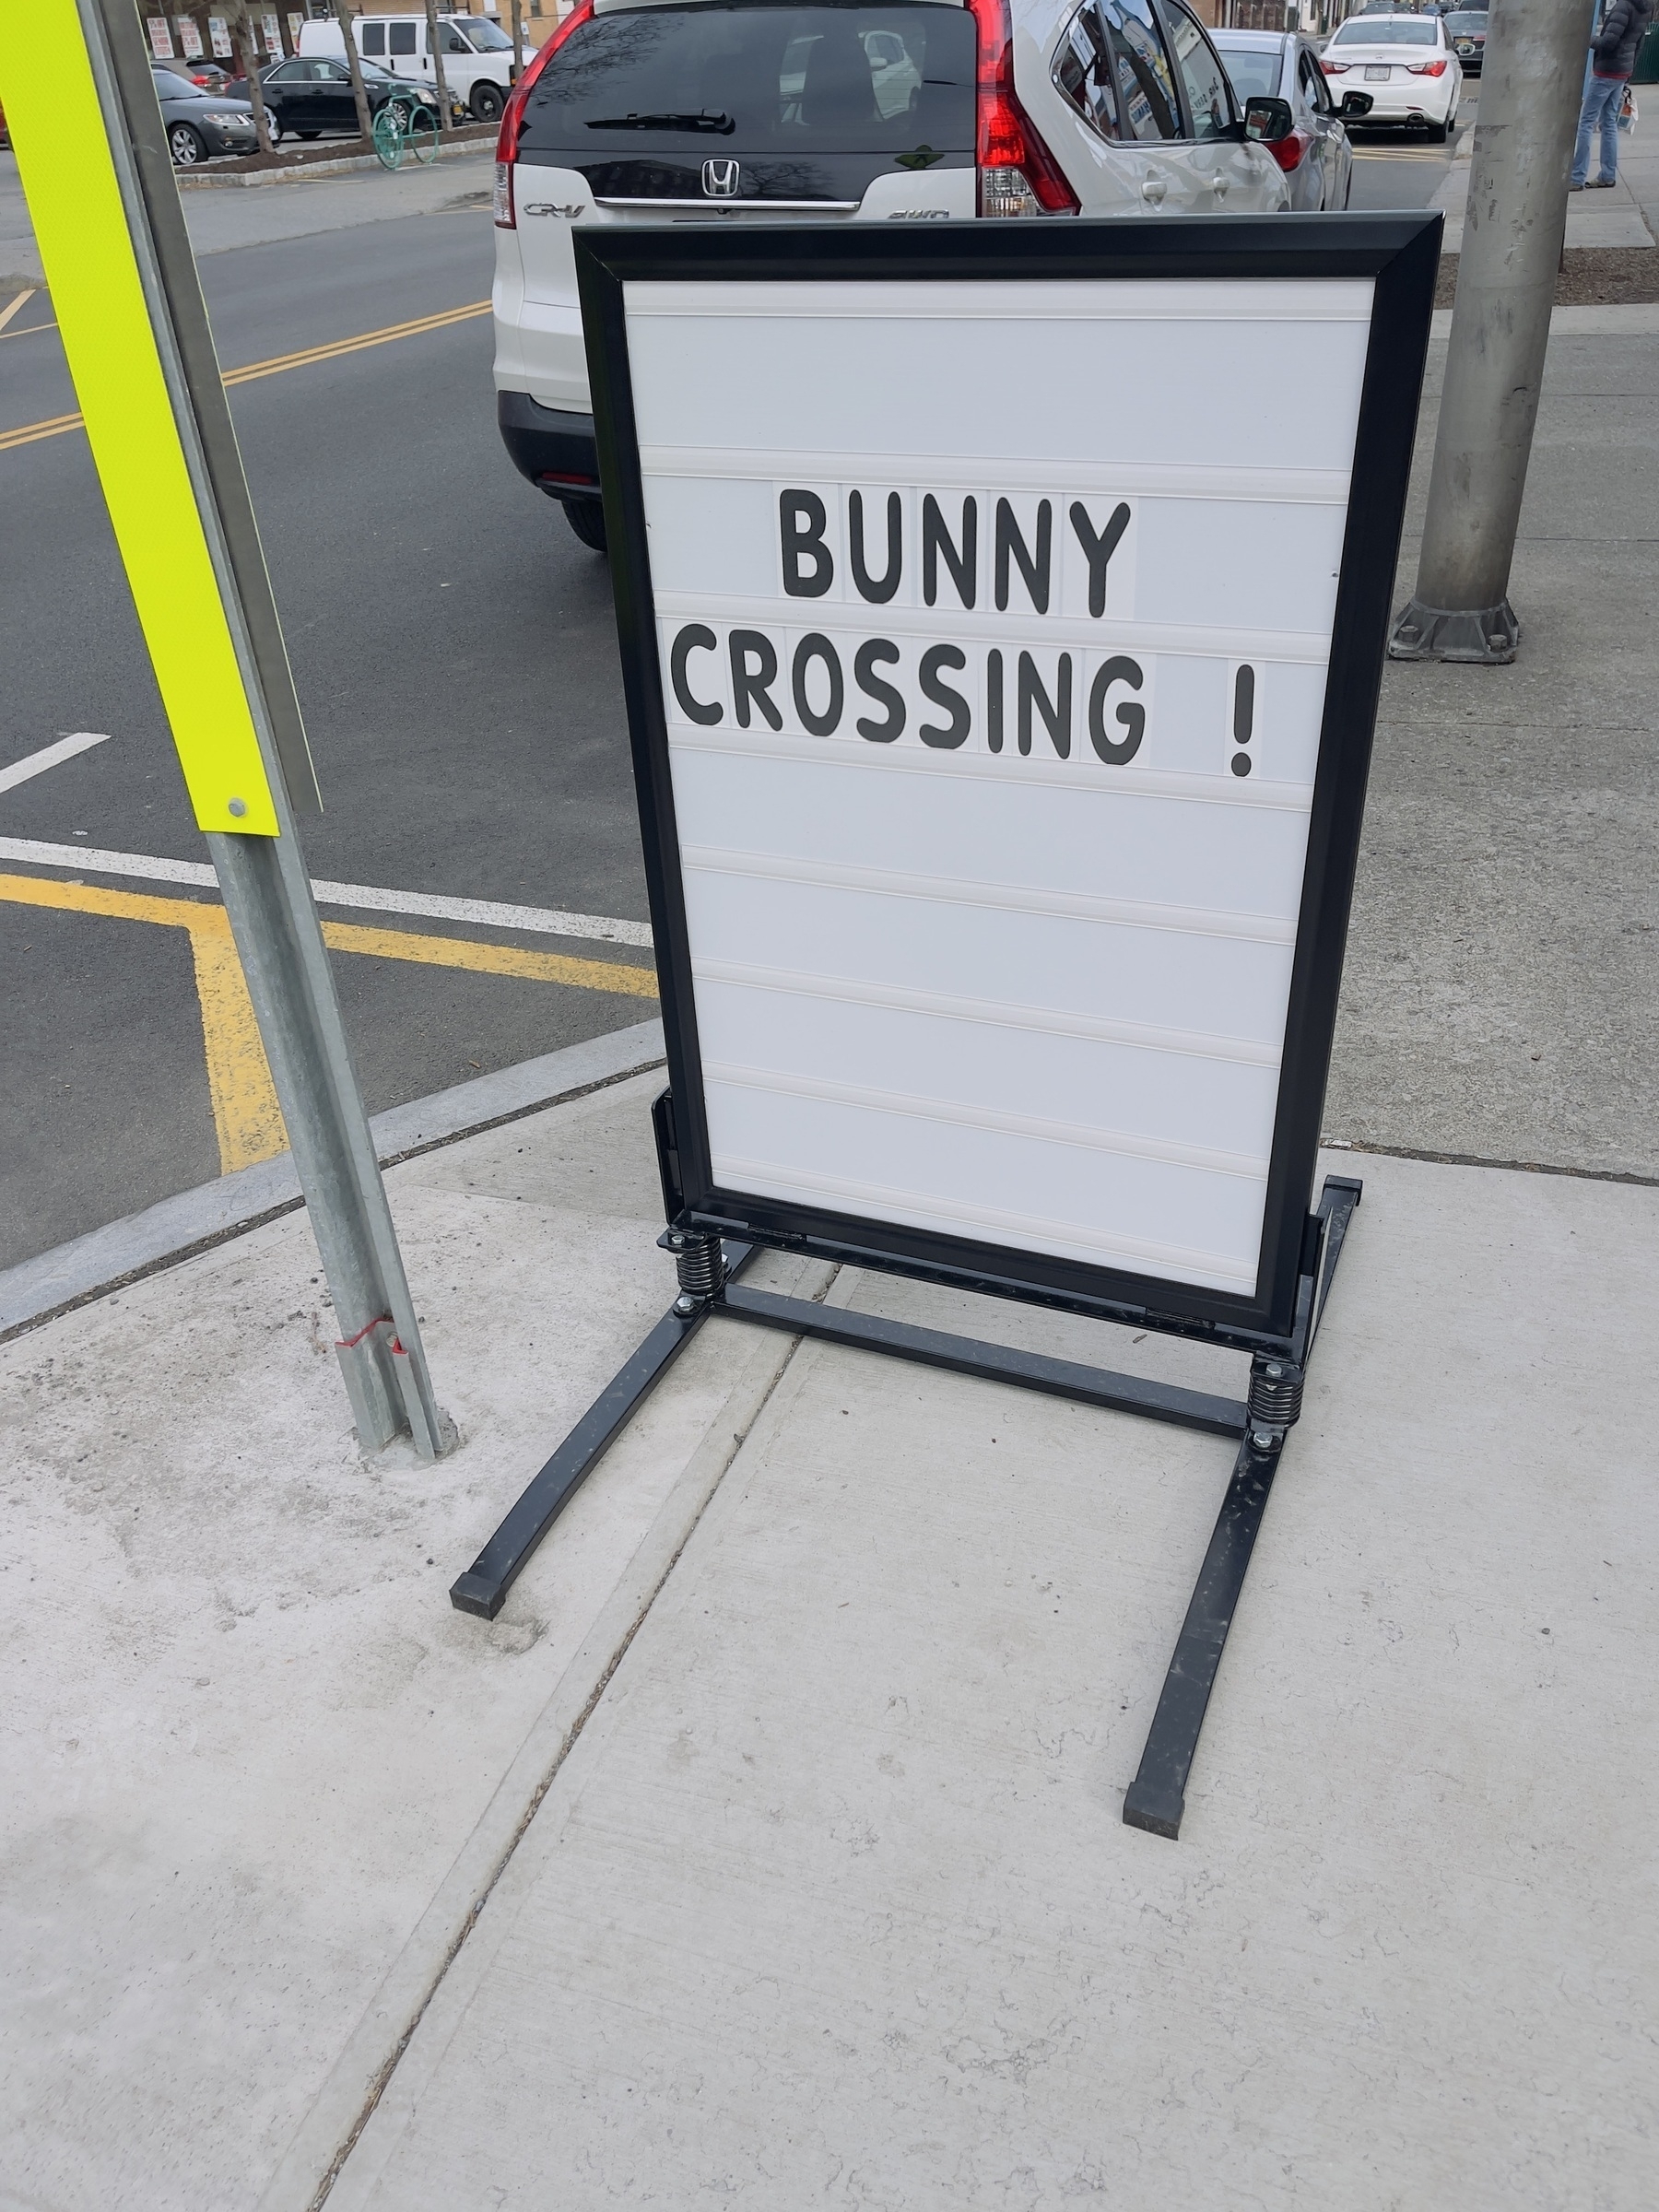 Sign outside local chocolate shop at easter time saying “Bunny Crossing”